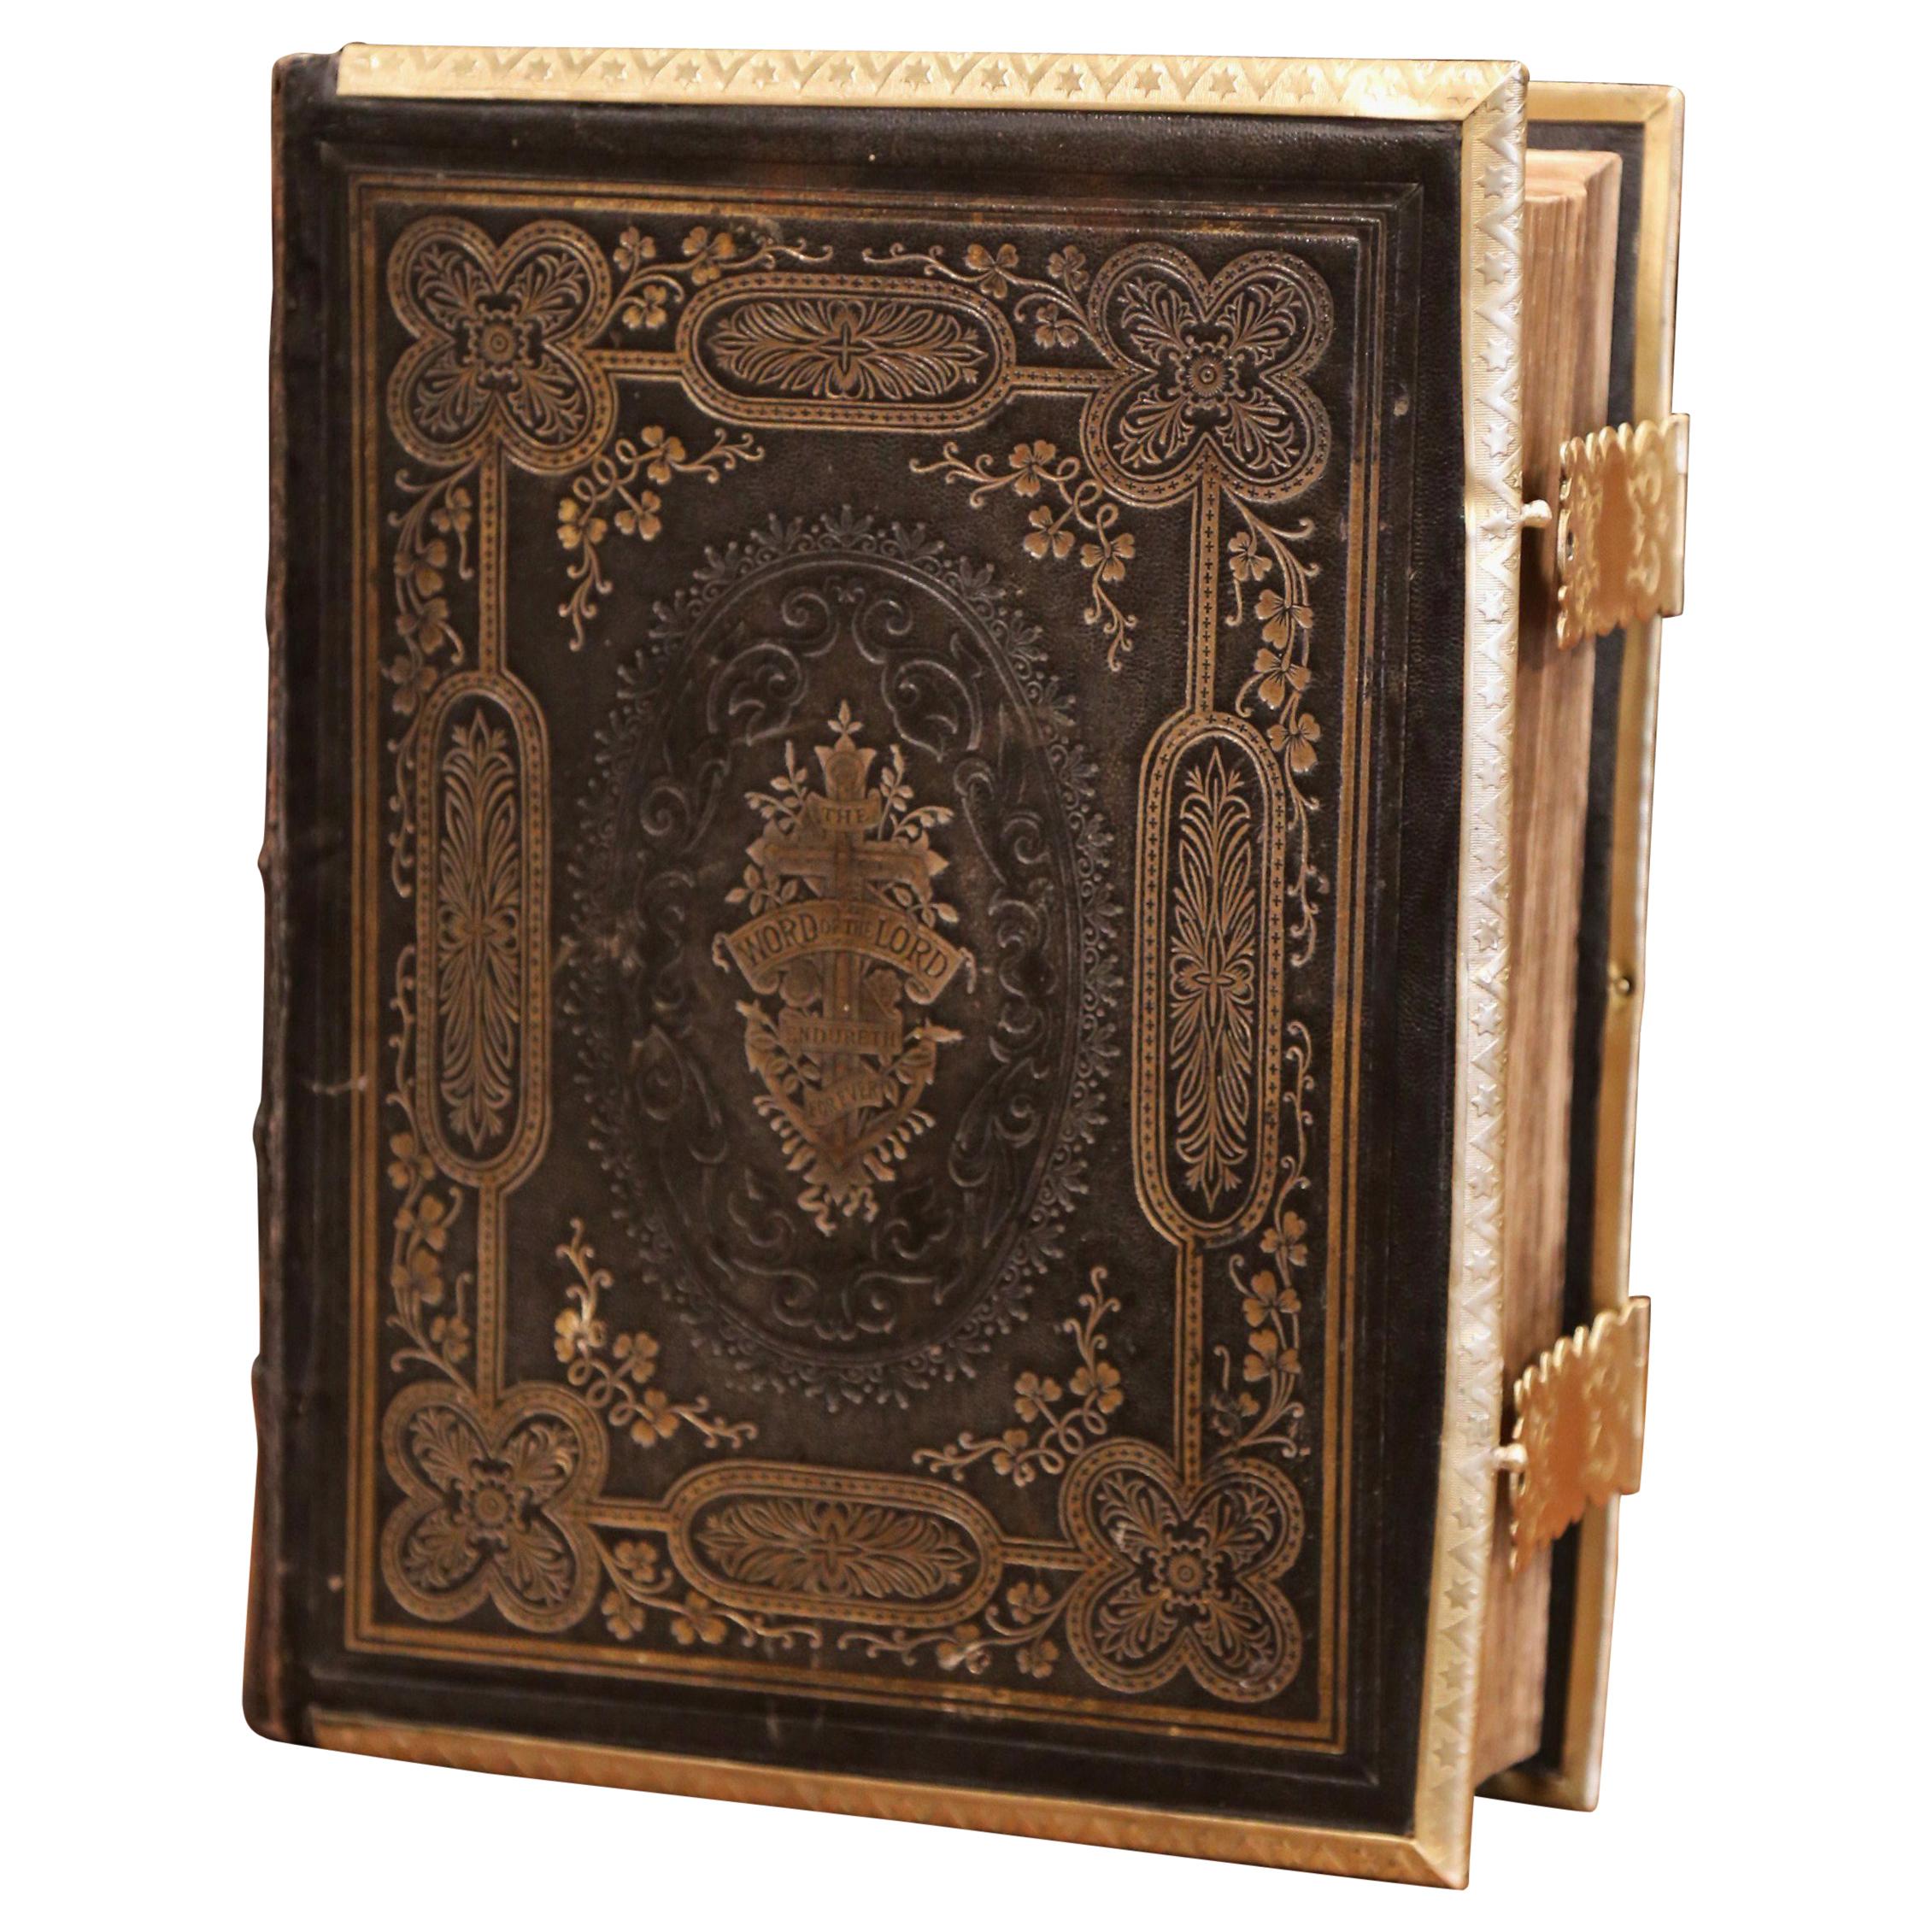 19th Century English Leather Bound Holy Bible with Gilt Tooling and Brass Locks